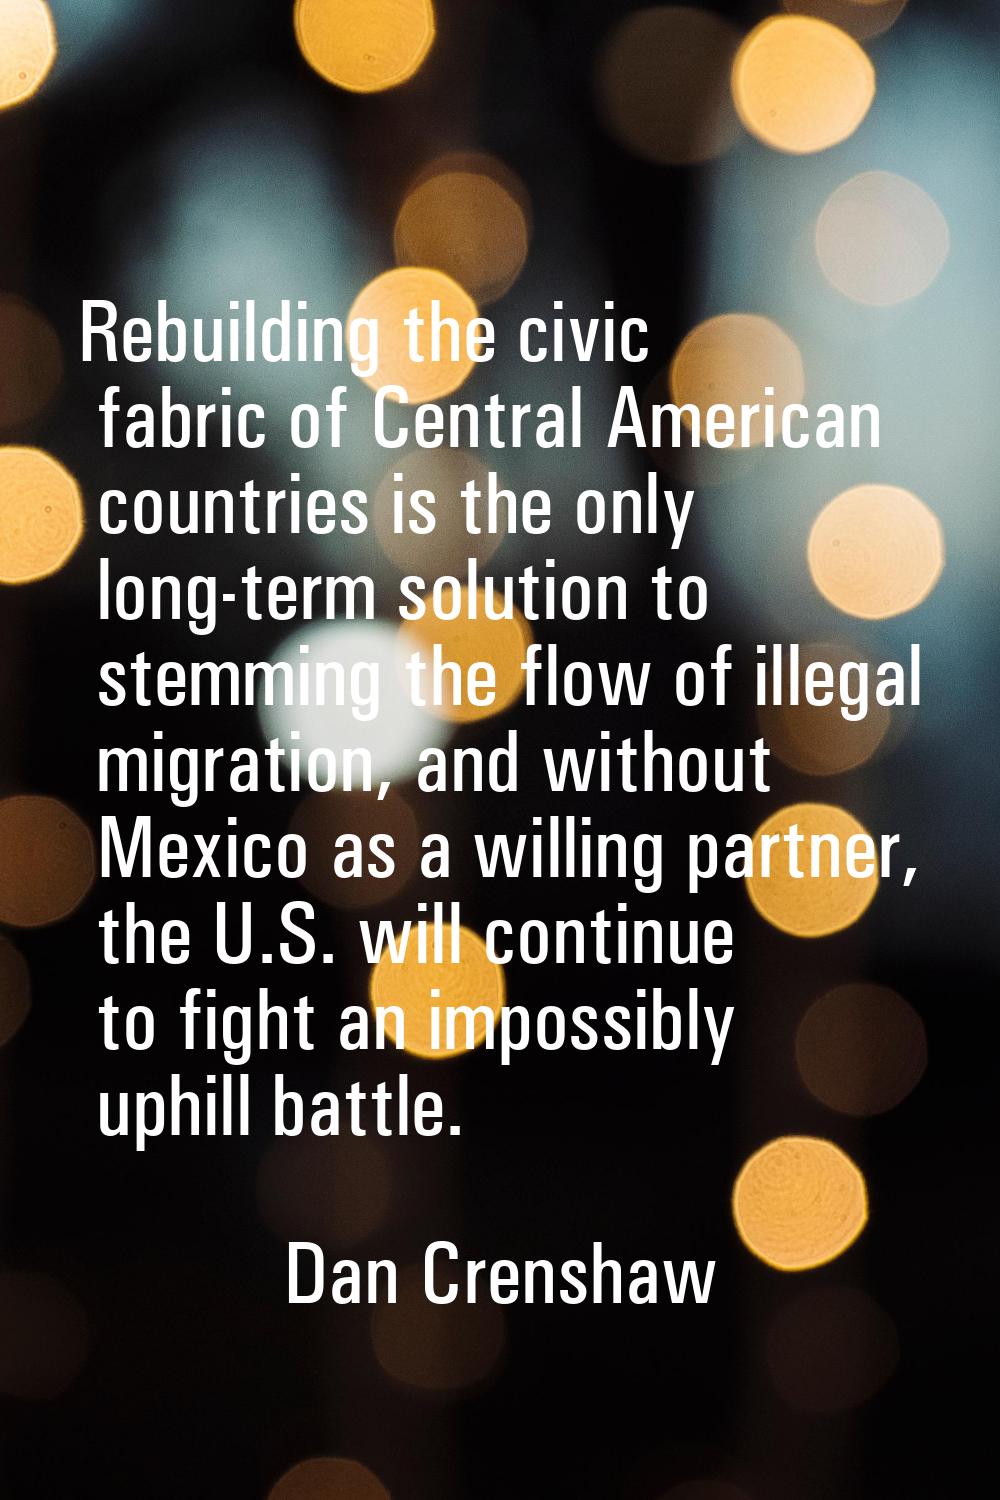 Rebuilding the civic fabric of Central American countries is the only long-term solution to stemmin